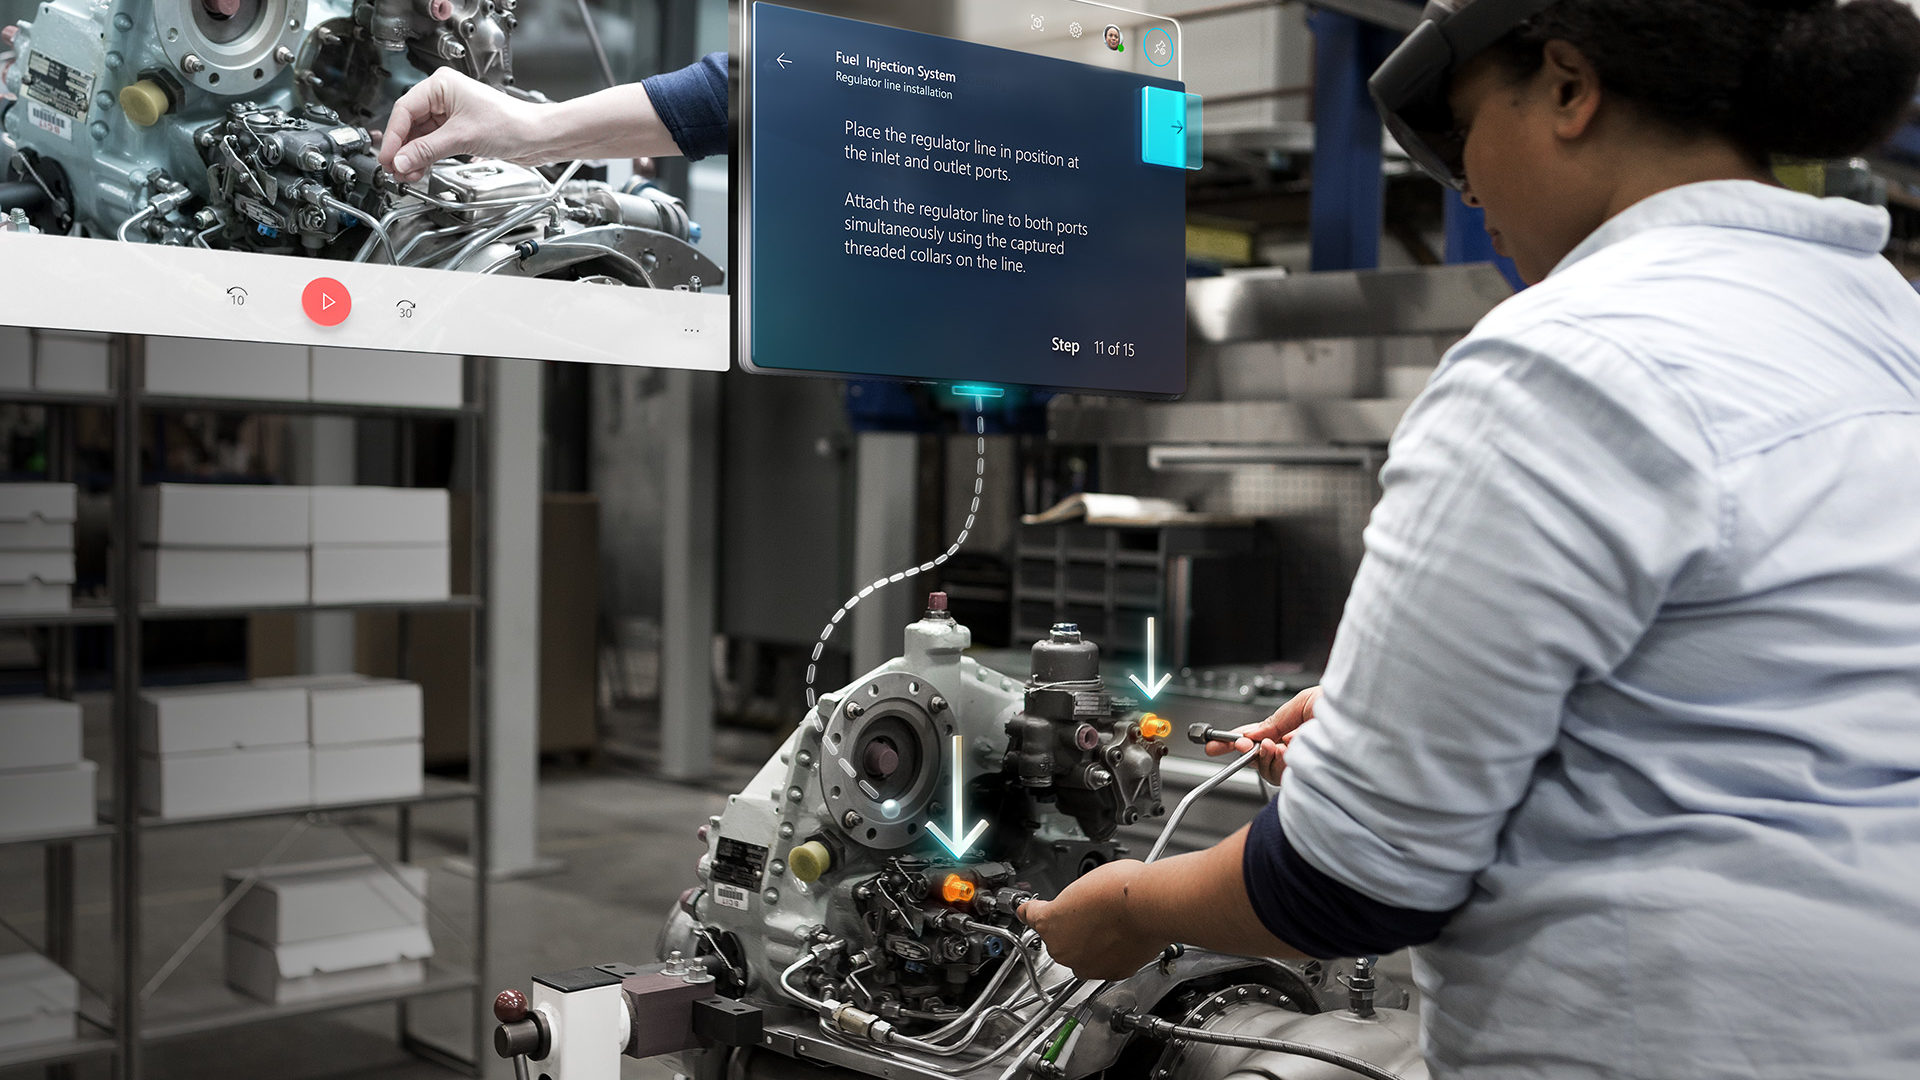 hololens 2 news roundup dynamics 365 guides holographic training 4 1920x1080